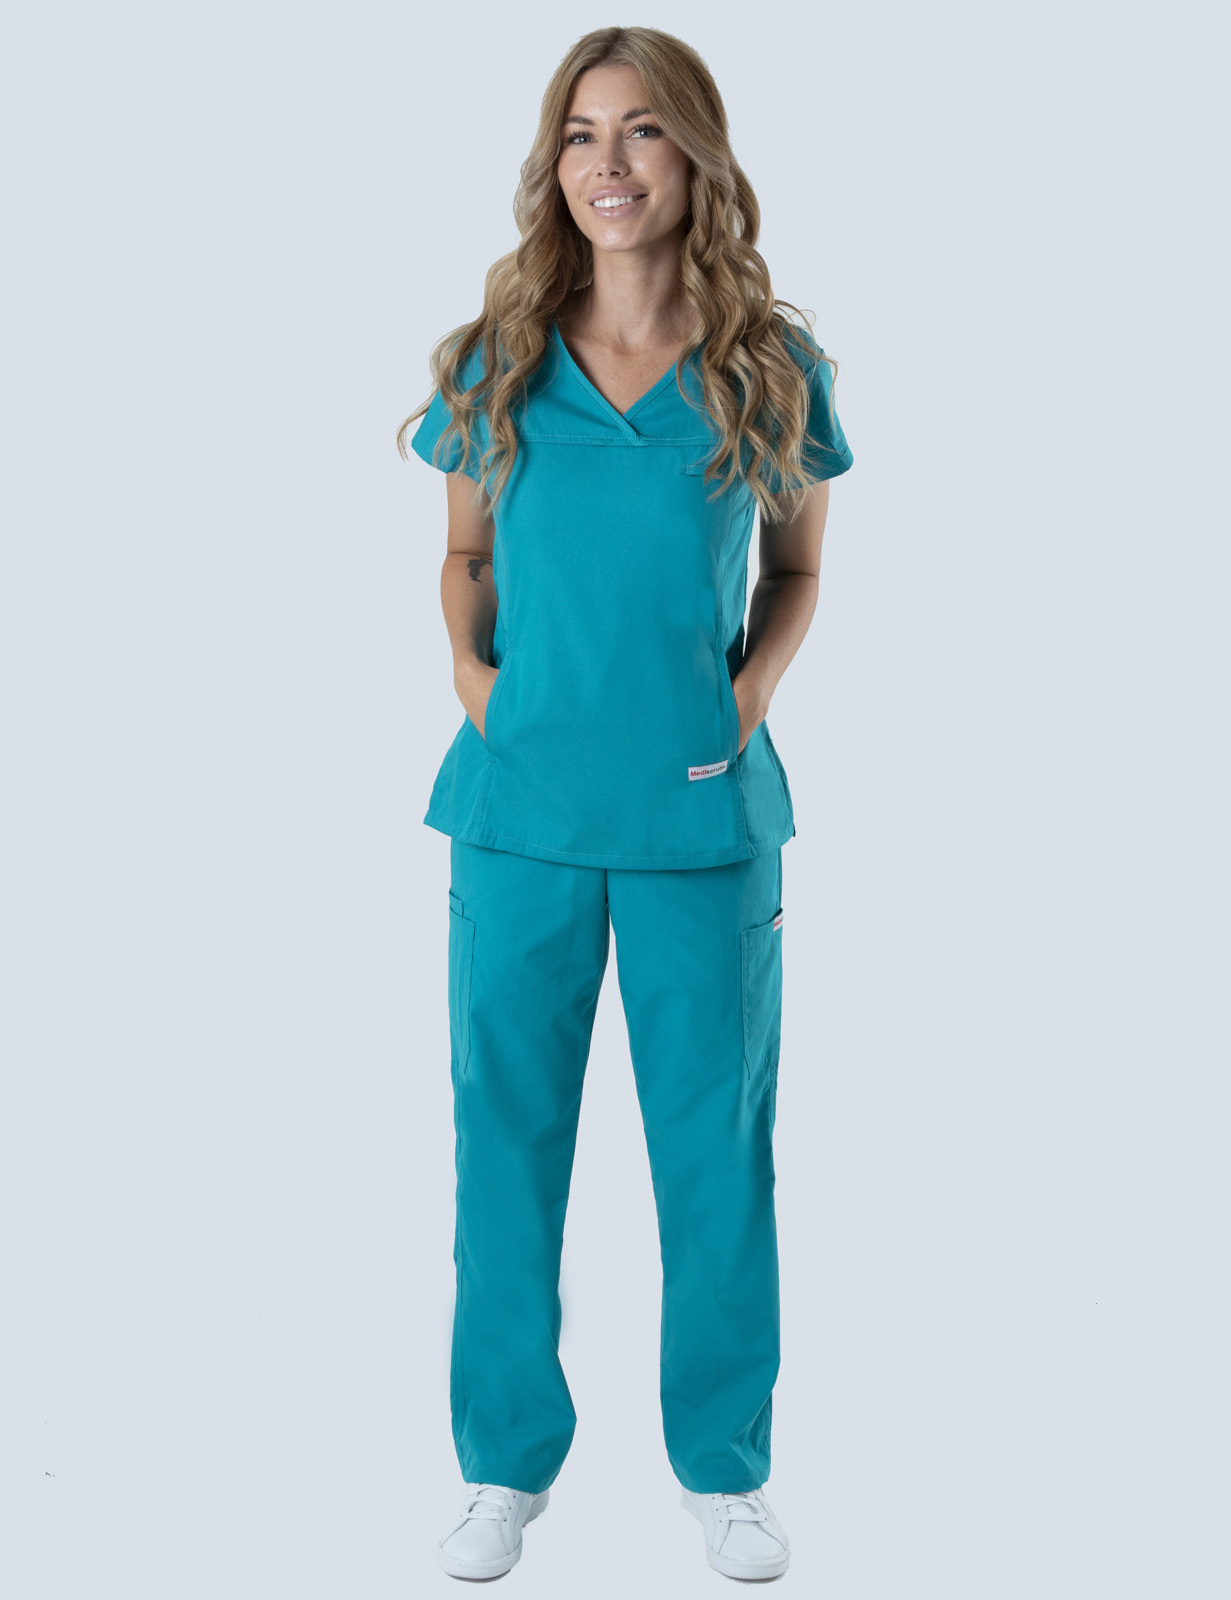 Nambour Hospital - AIN (Women's Fit Solid Scrub Top and Cargo Pants in Teal incl Logos)